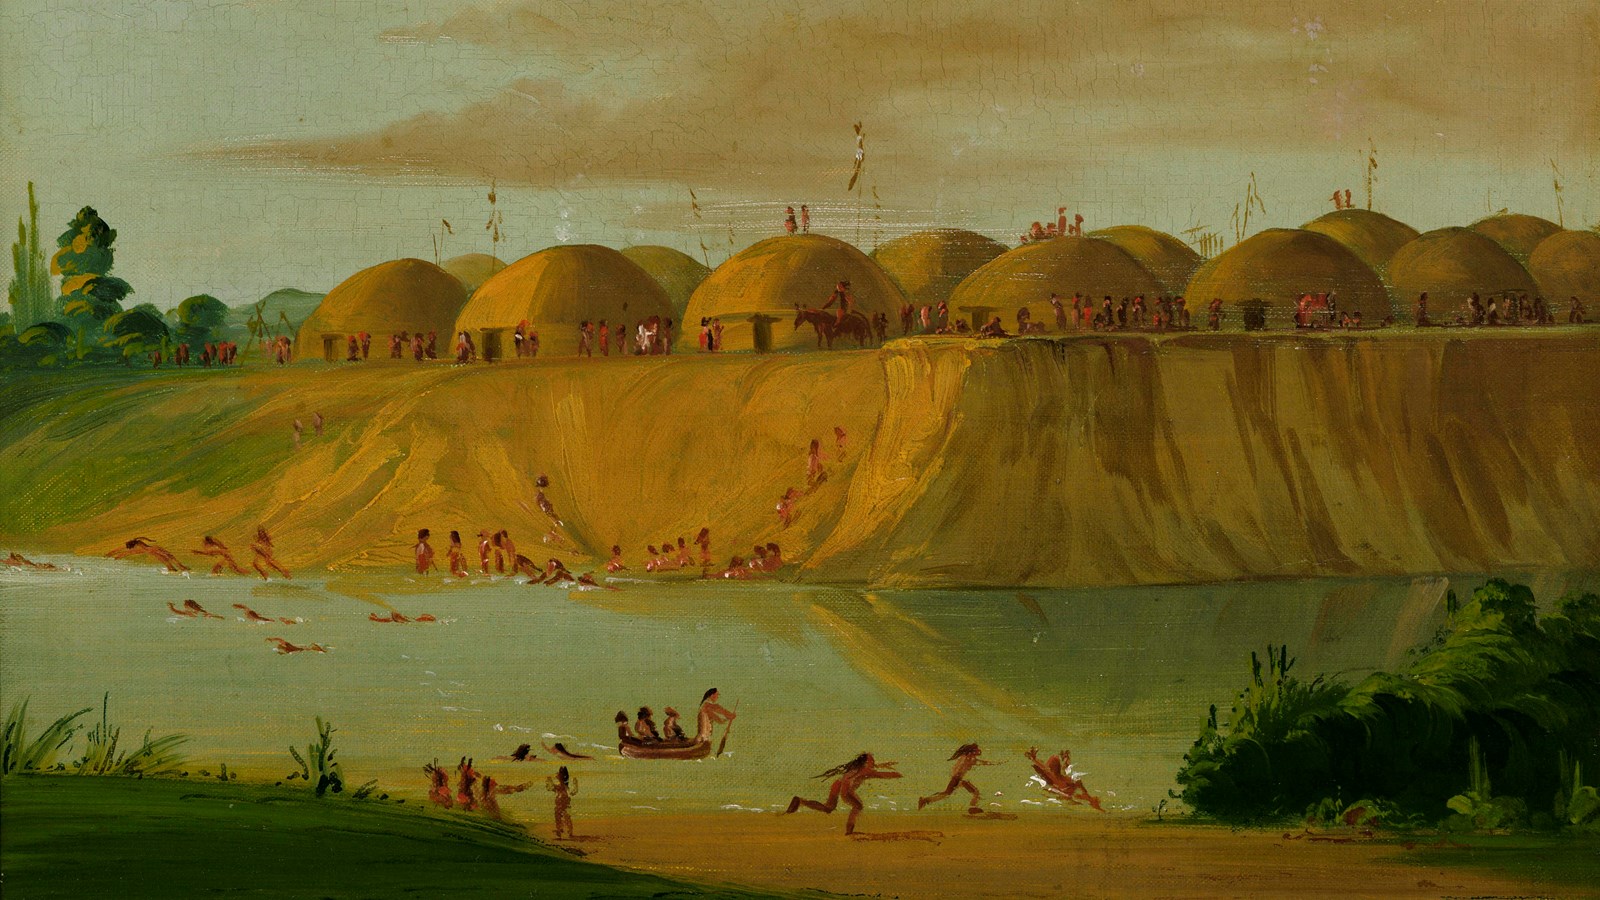 Painting of people and rounded houses sit at edge of a steep riverbank. Other people depicted below 